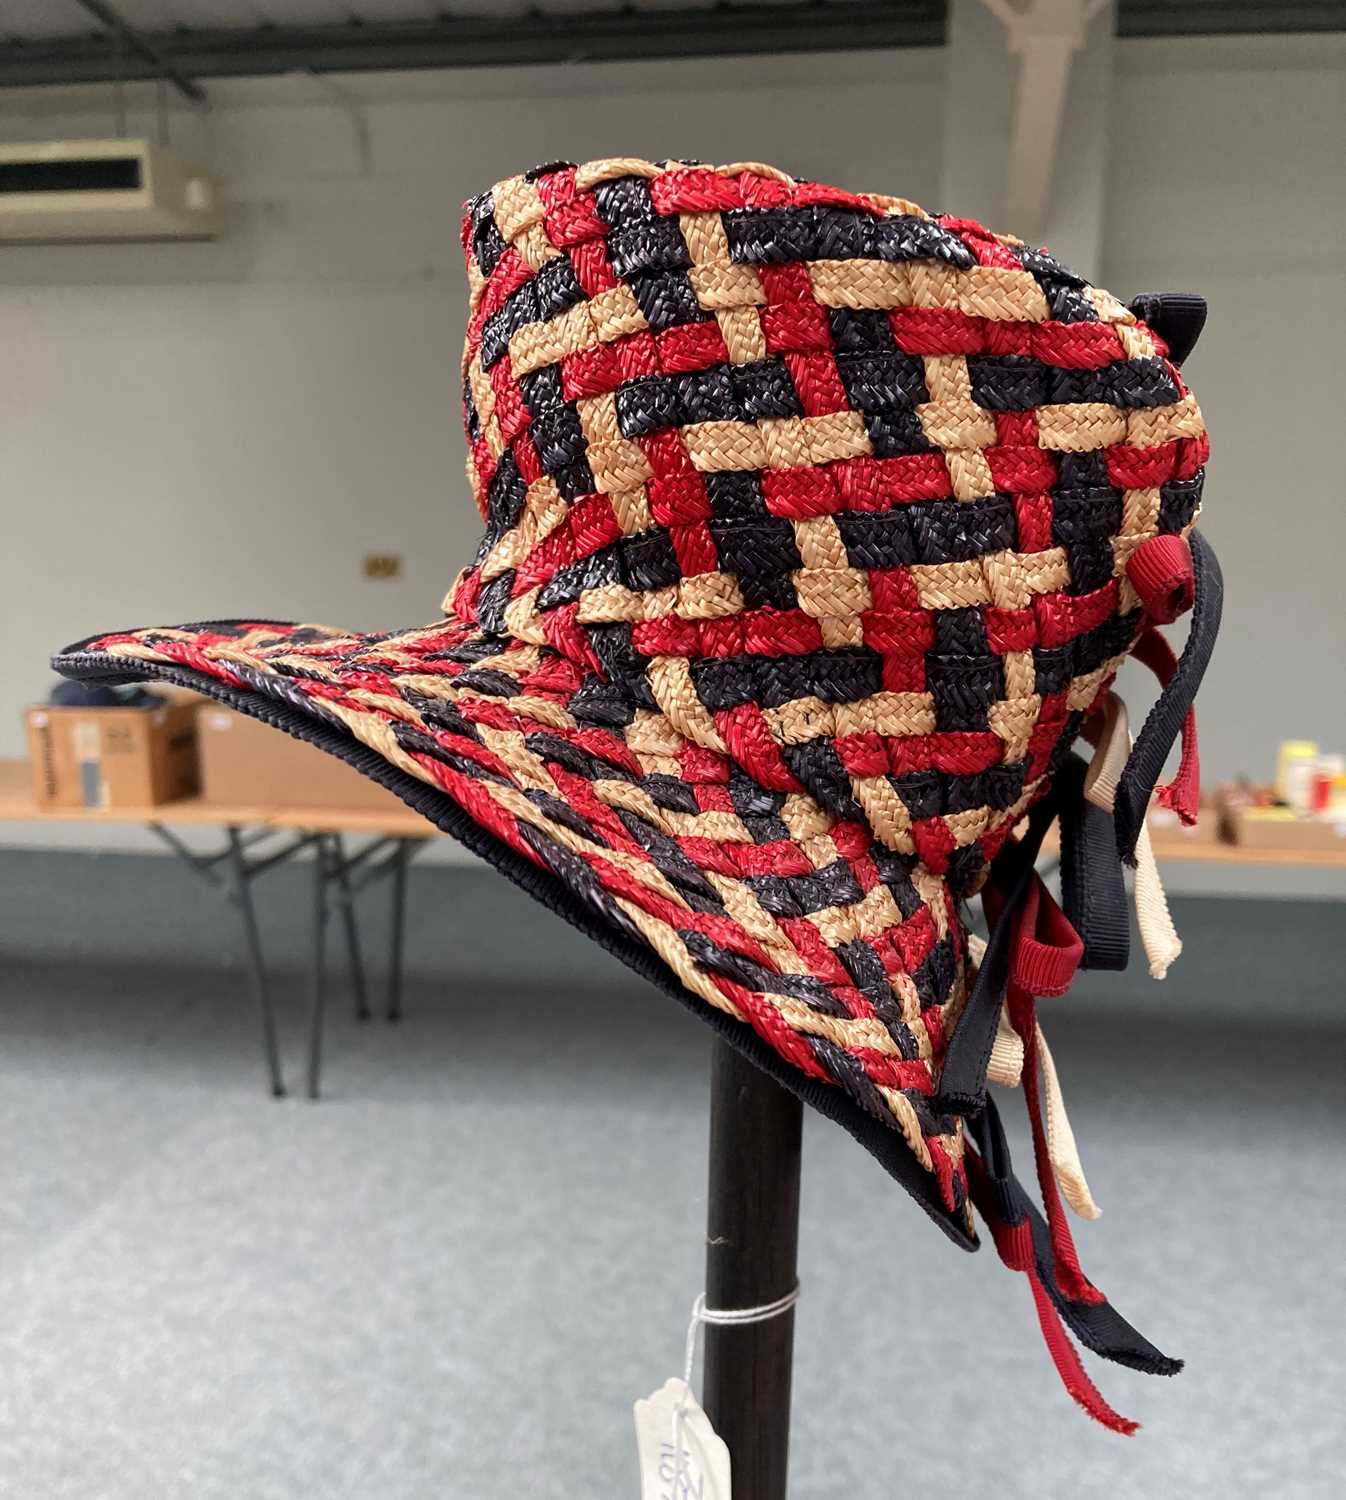 Circa 1940s Amercian Red, White and Blue Woven Raffia Tilt Hat, with alternating coloured - Image 3 of 4